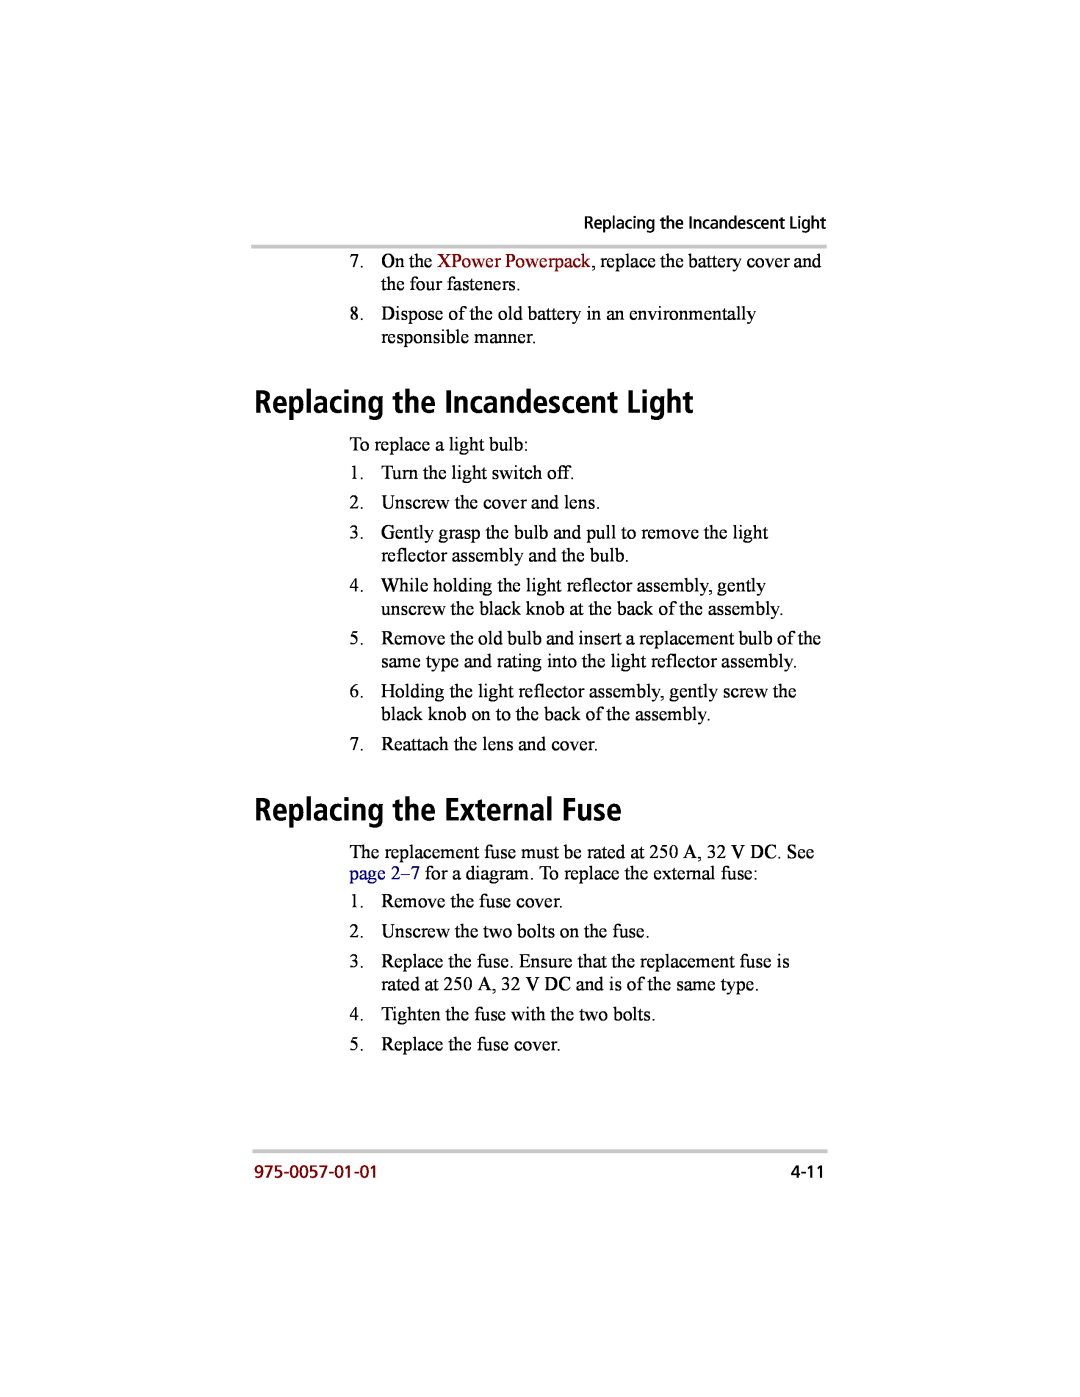 Xantrex Technology 200 manual Replacing the Incandescent Light, Replacing the External Fuse 